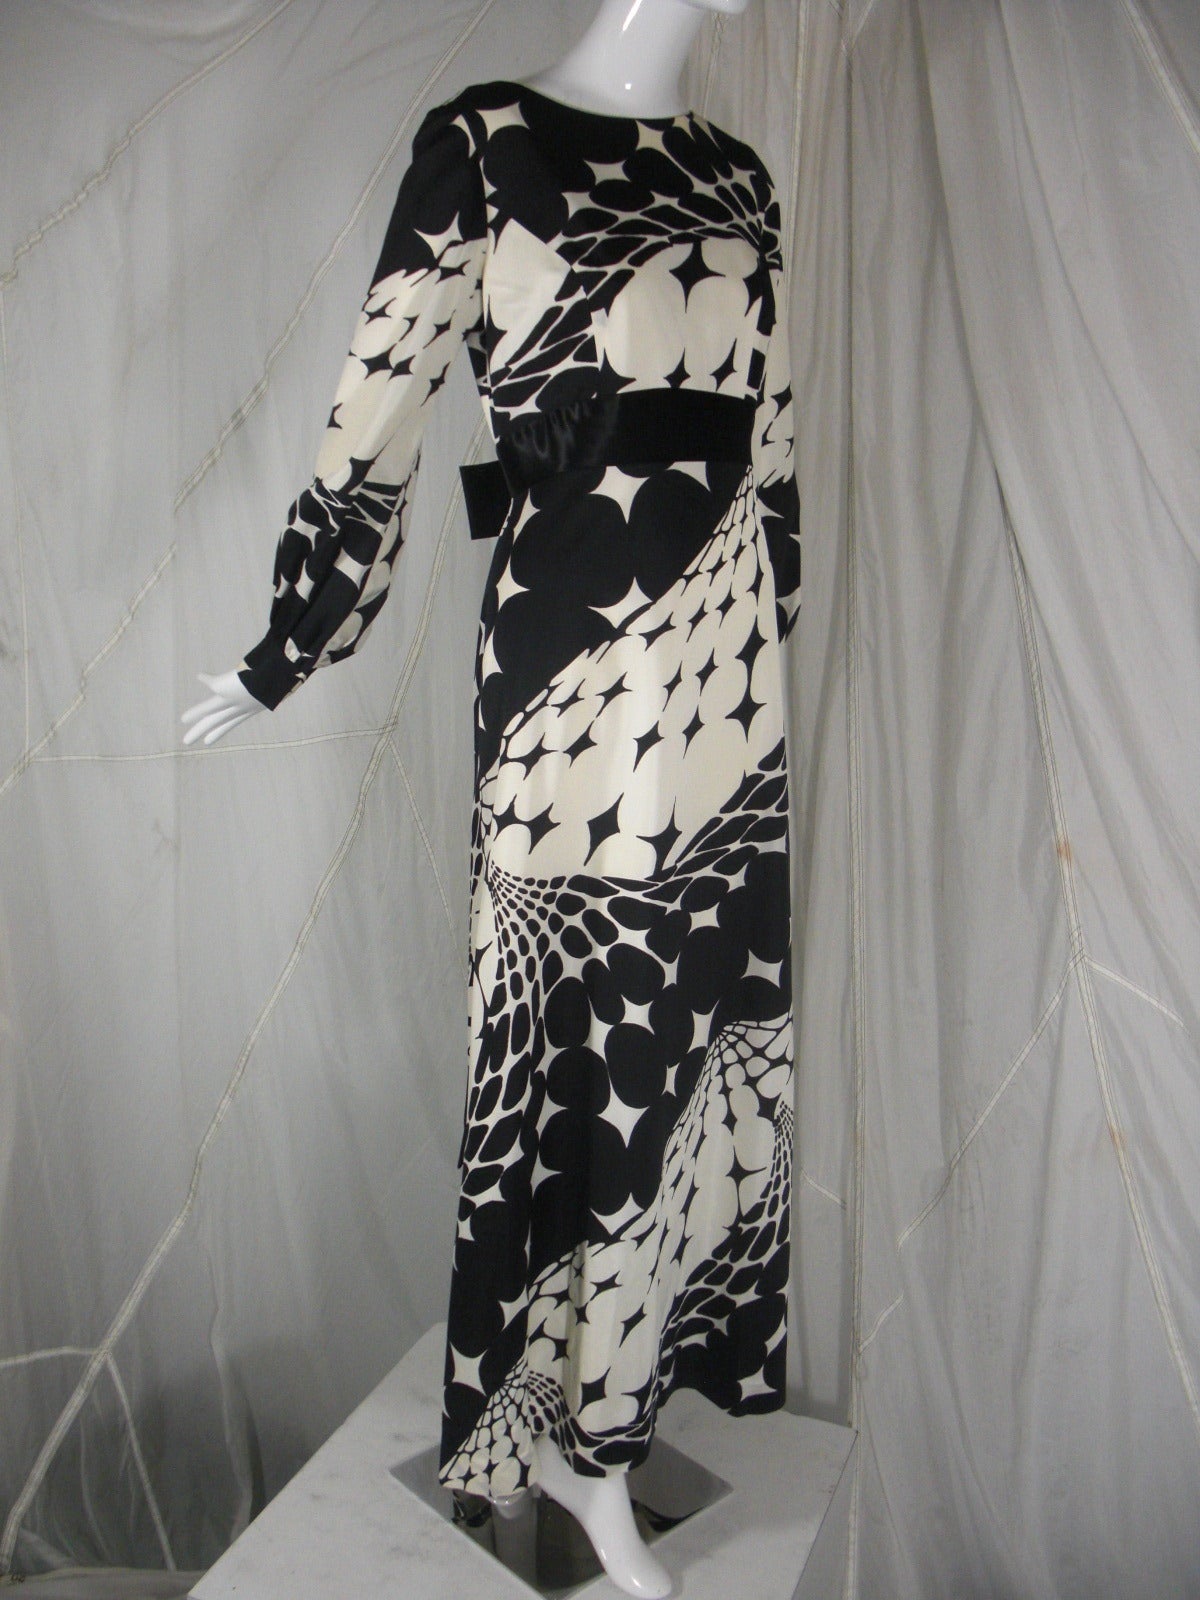 1970s Estevez Black and White Abstract Jersey Maxi Dress

Feminine Silhouette with Full Sleeve 
Sash at Waist in Satin and Low Square Back with Bow